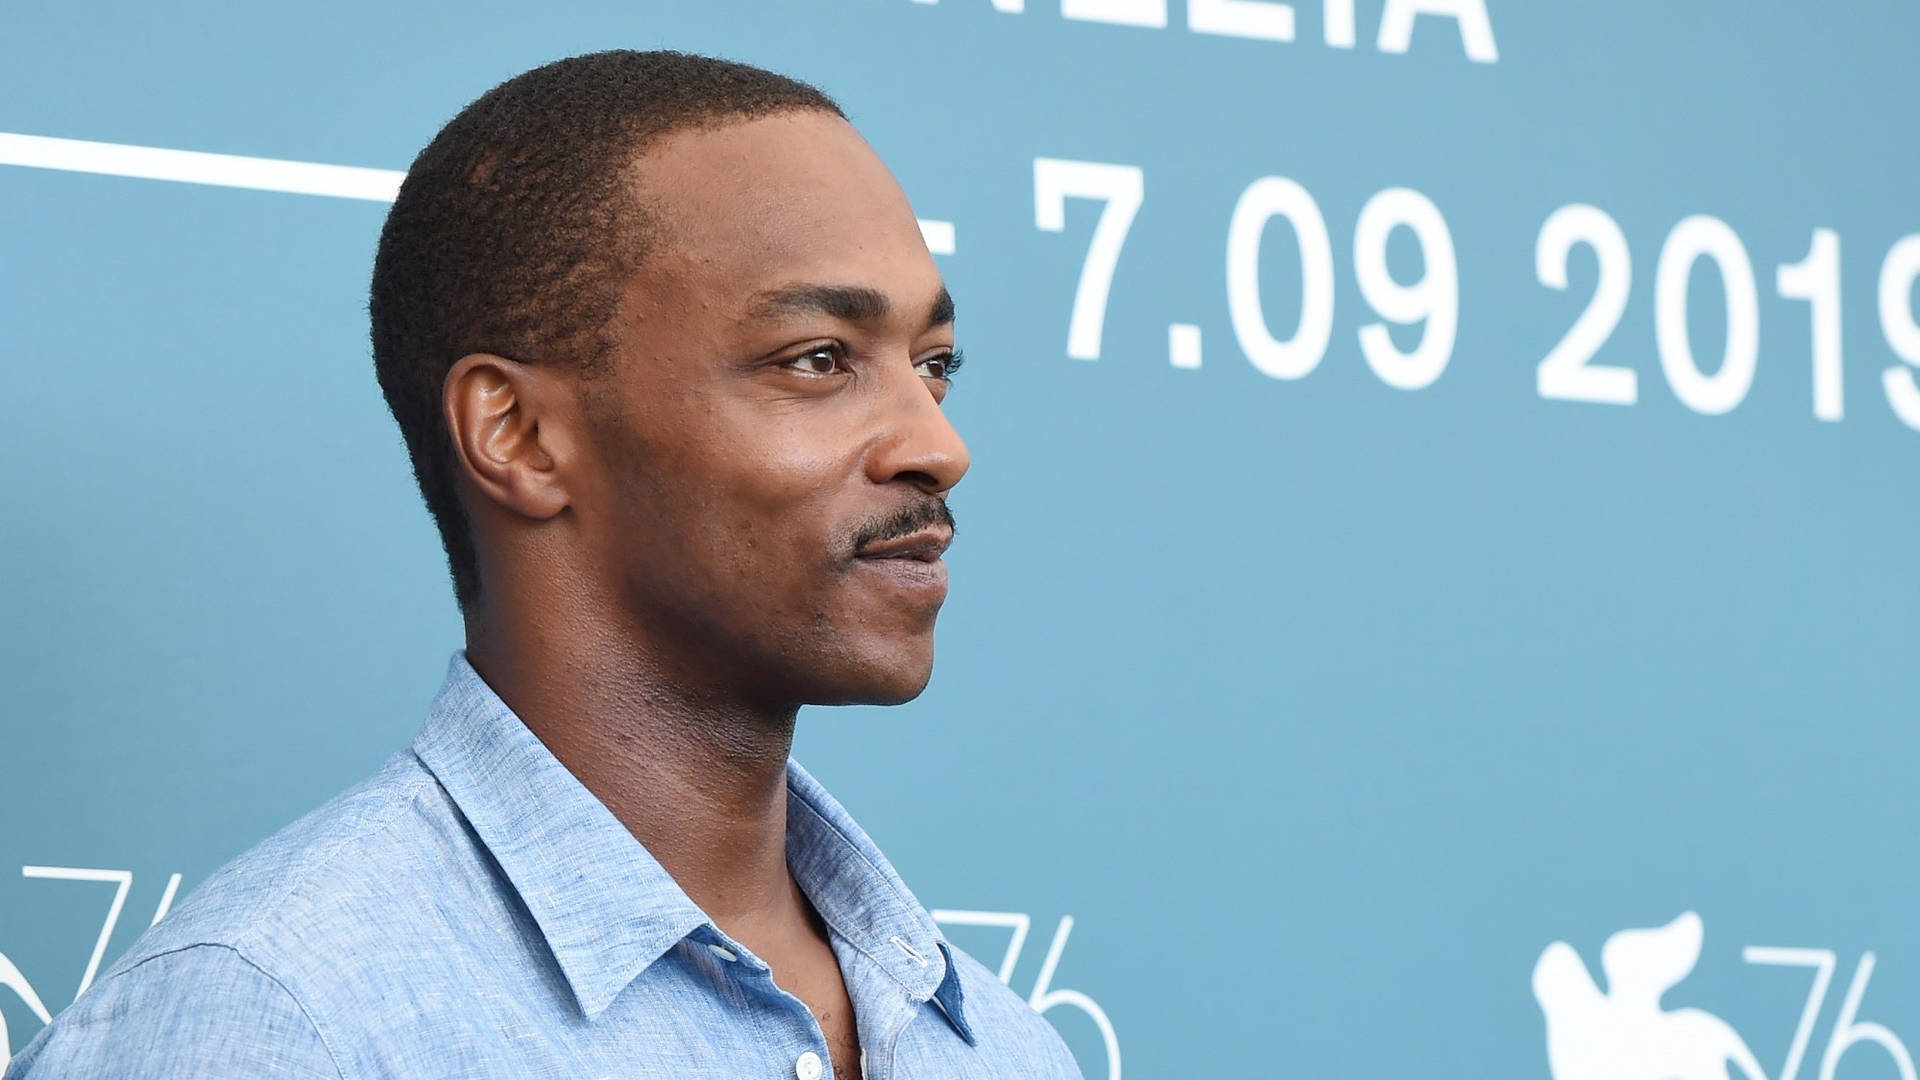 Anthony Mackie In Venice 2019 Wallpaper